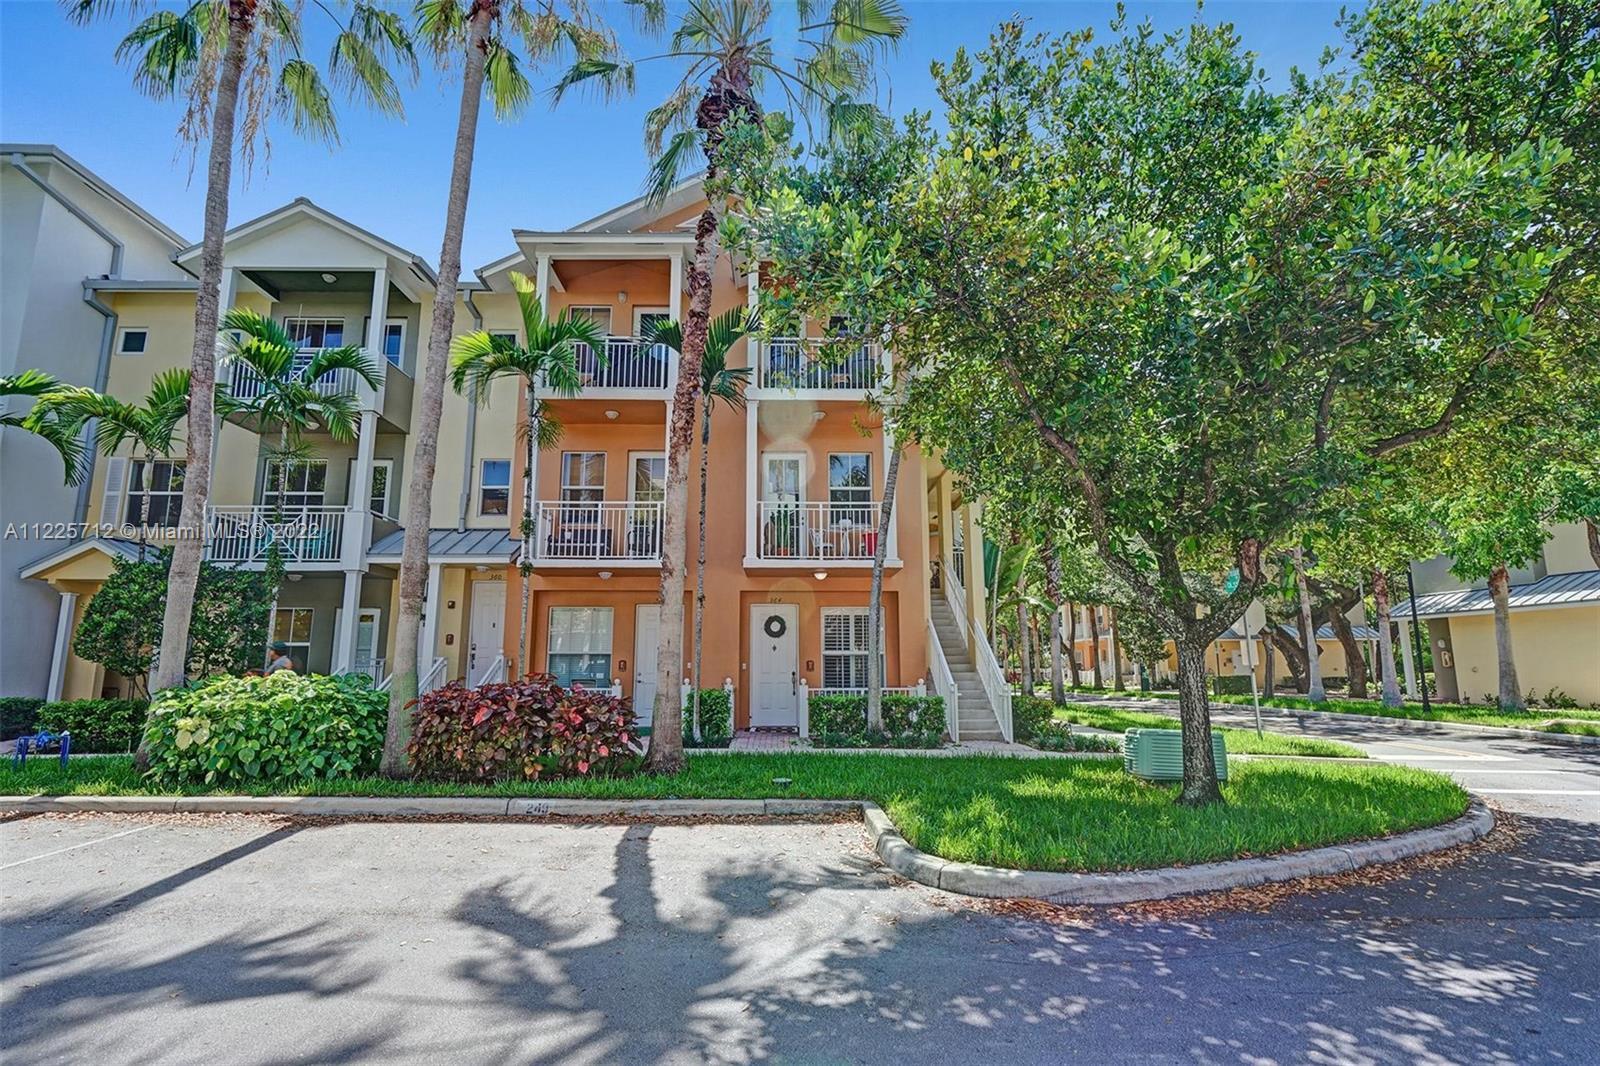 Located in the heart of Downtown Fort Lauderdale awaits this hidden gem 1 bedroom, 1 bathroom corner